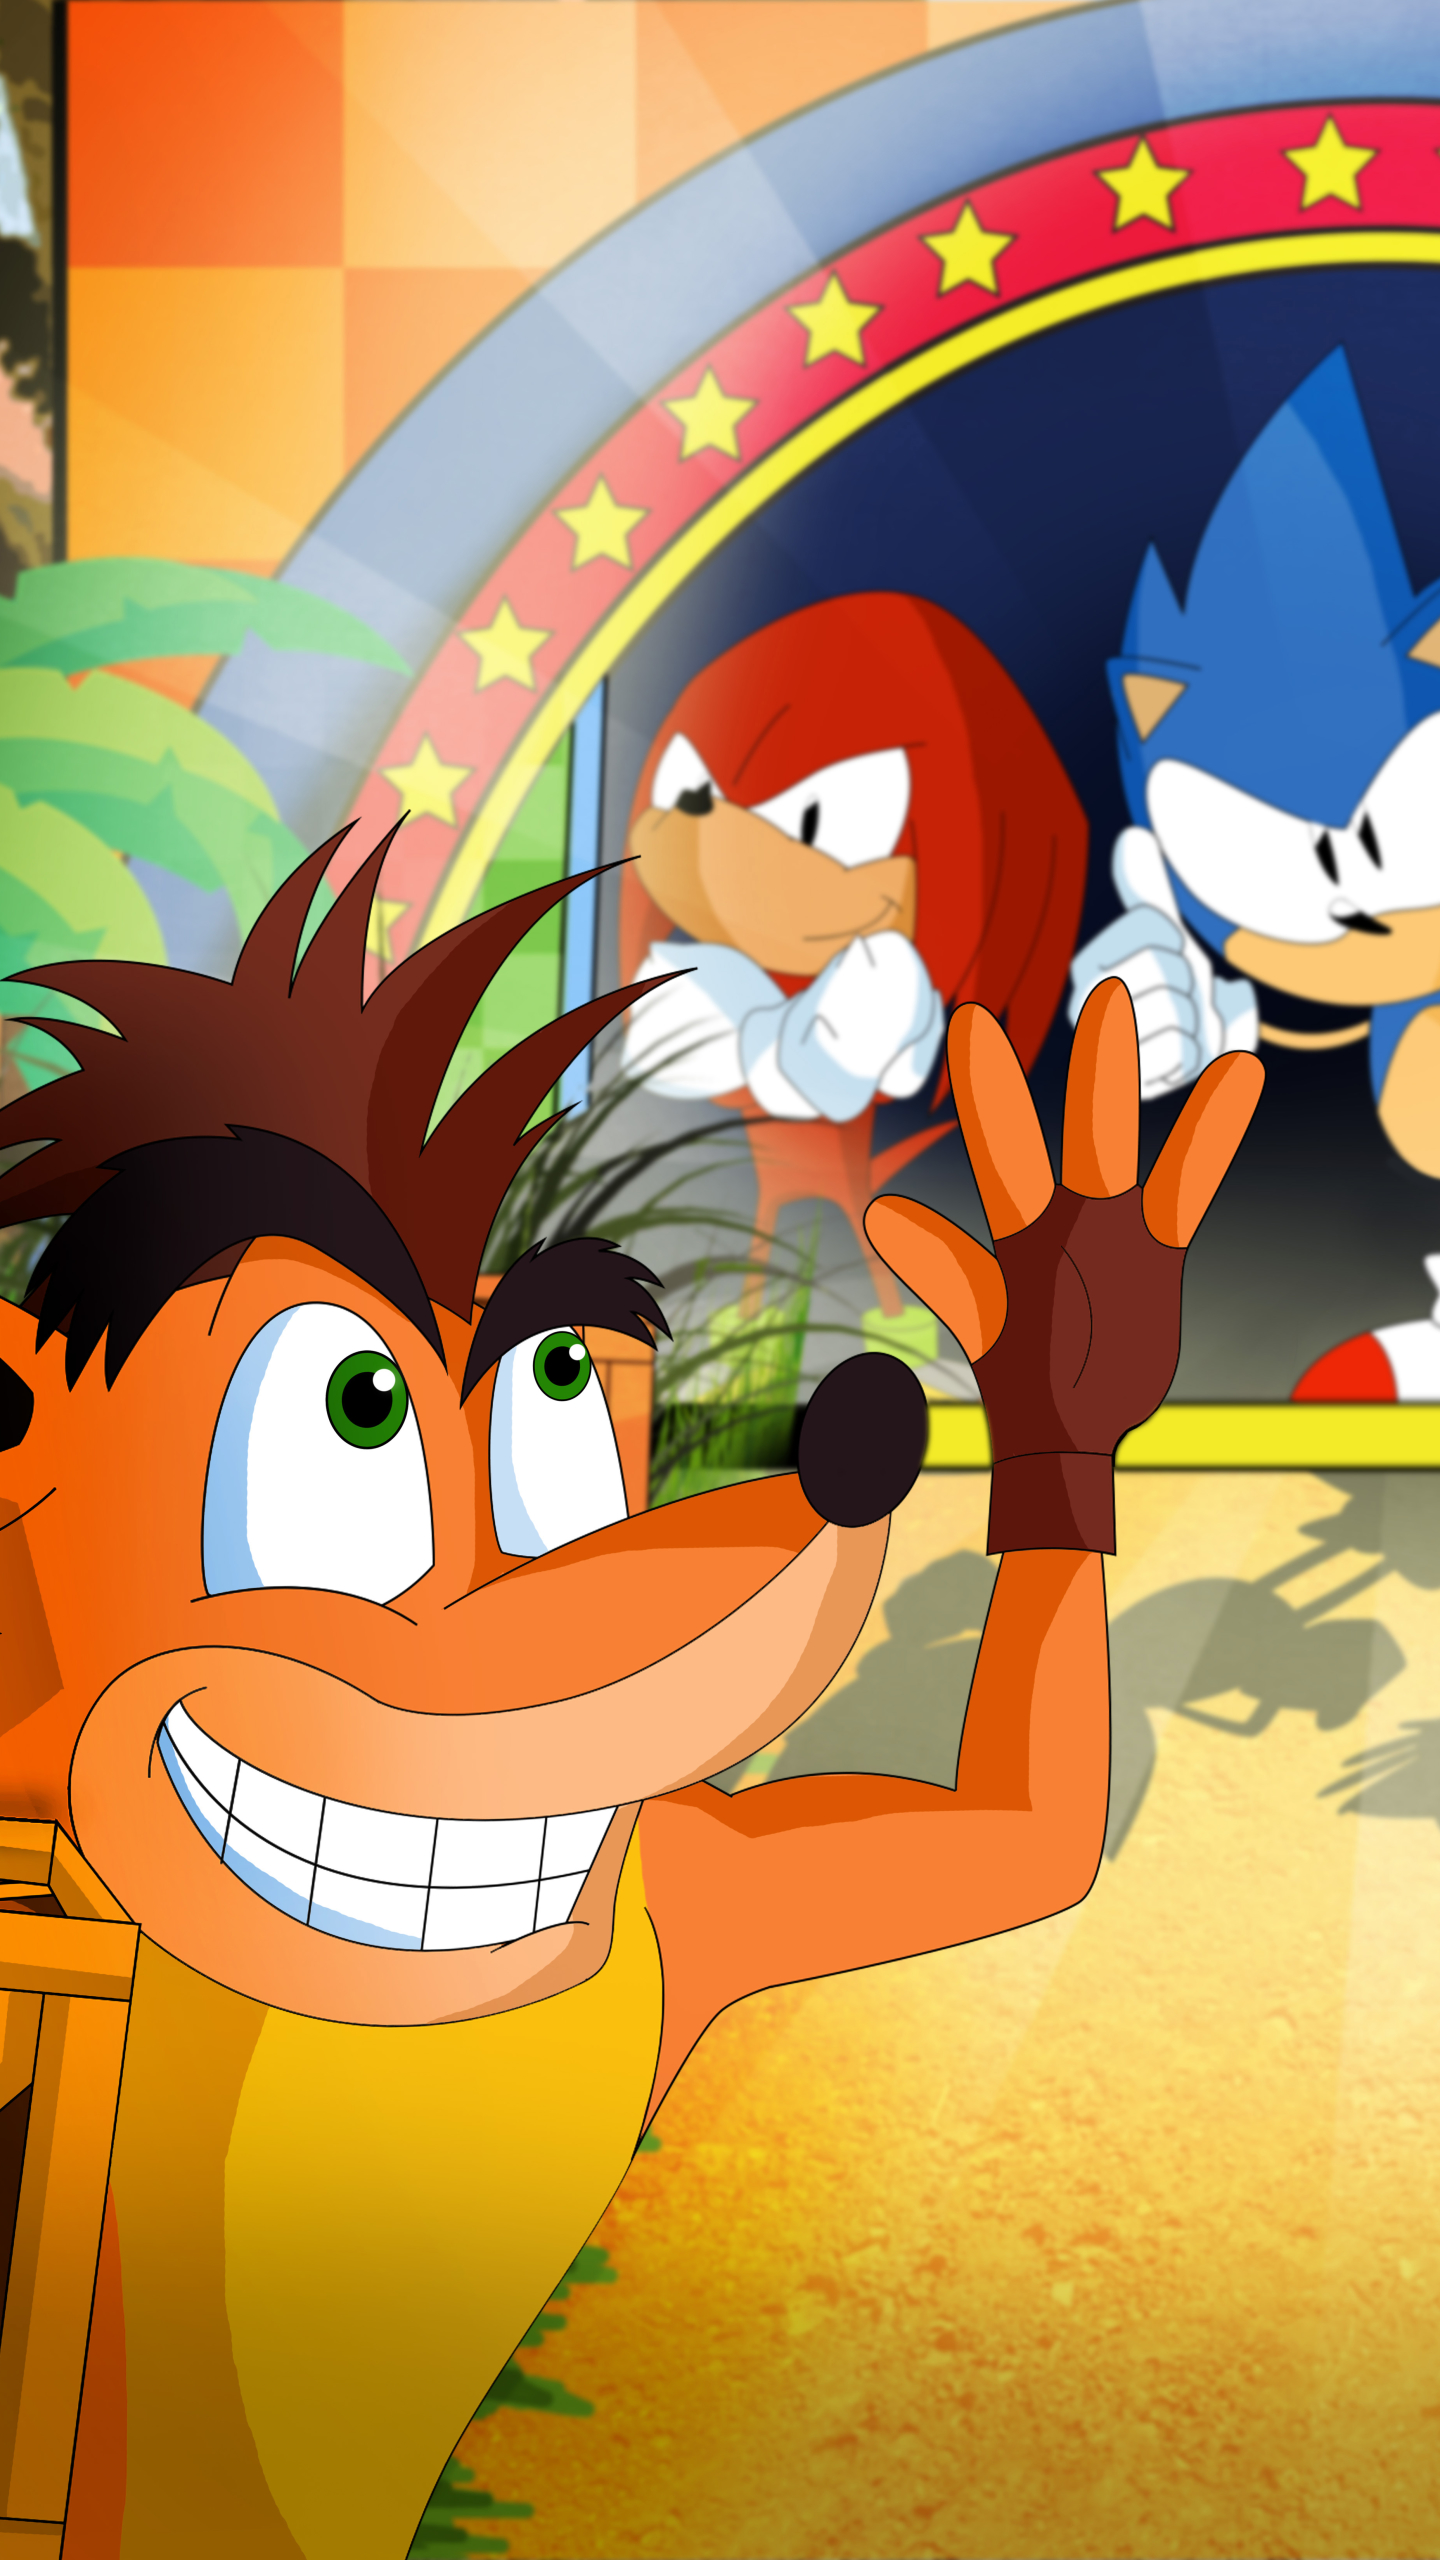 video game, crossover, classic sonic, classic knuckles, sonic the hedgehog, knuckles the echidna, coco bandicoot, crash bandicoot n sane trilogy, sonic mania, crash bandicoot